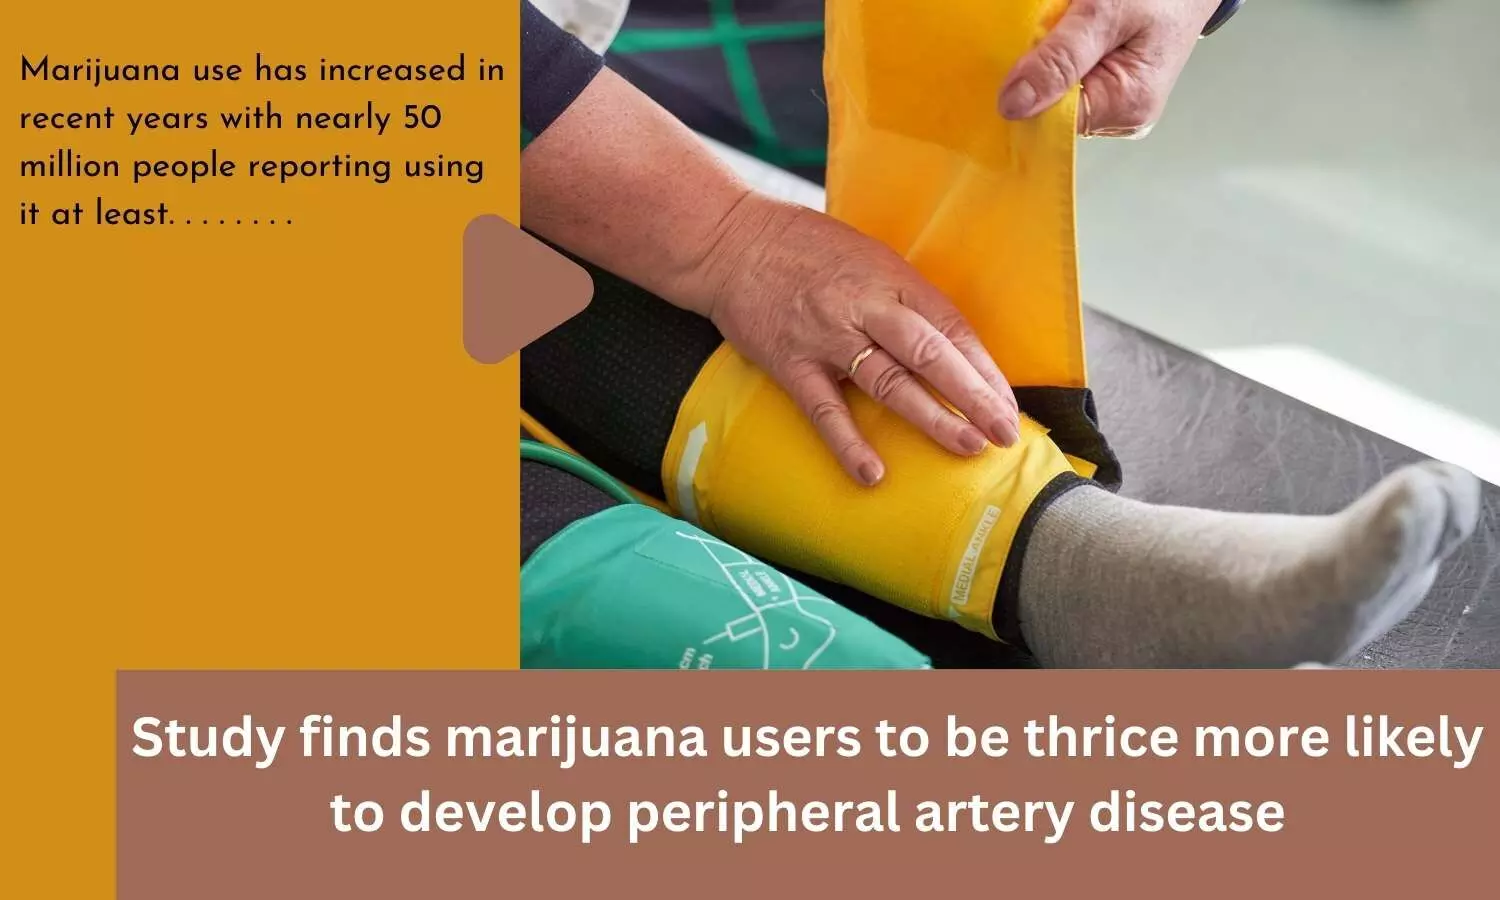 Study finds marijuana users to be thrice more likely to develop peripheral artery disease